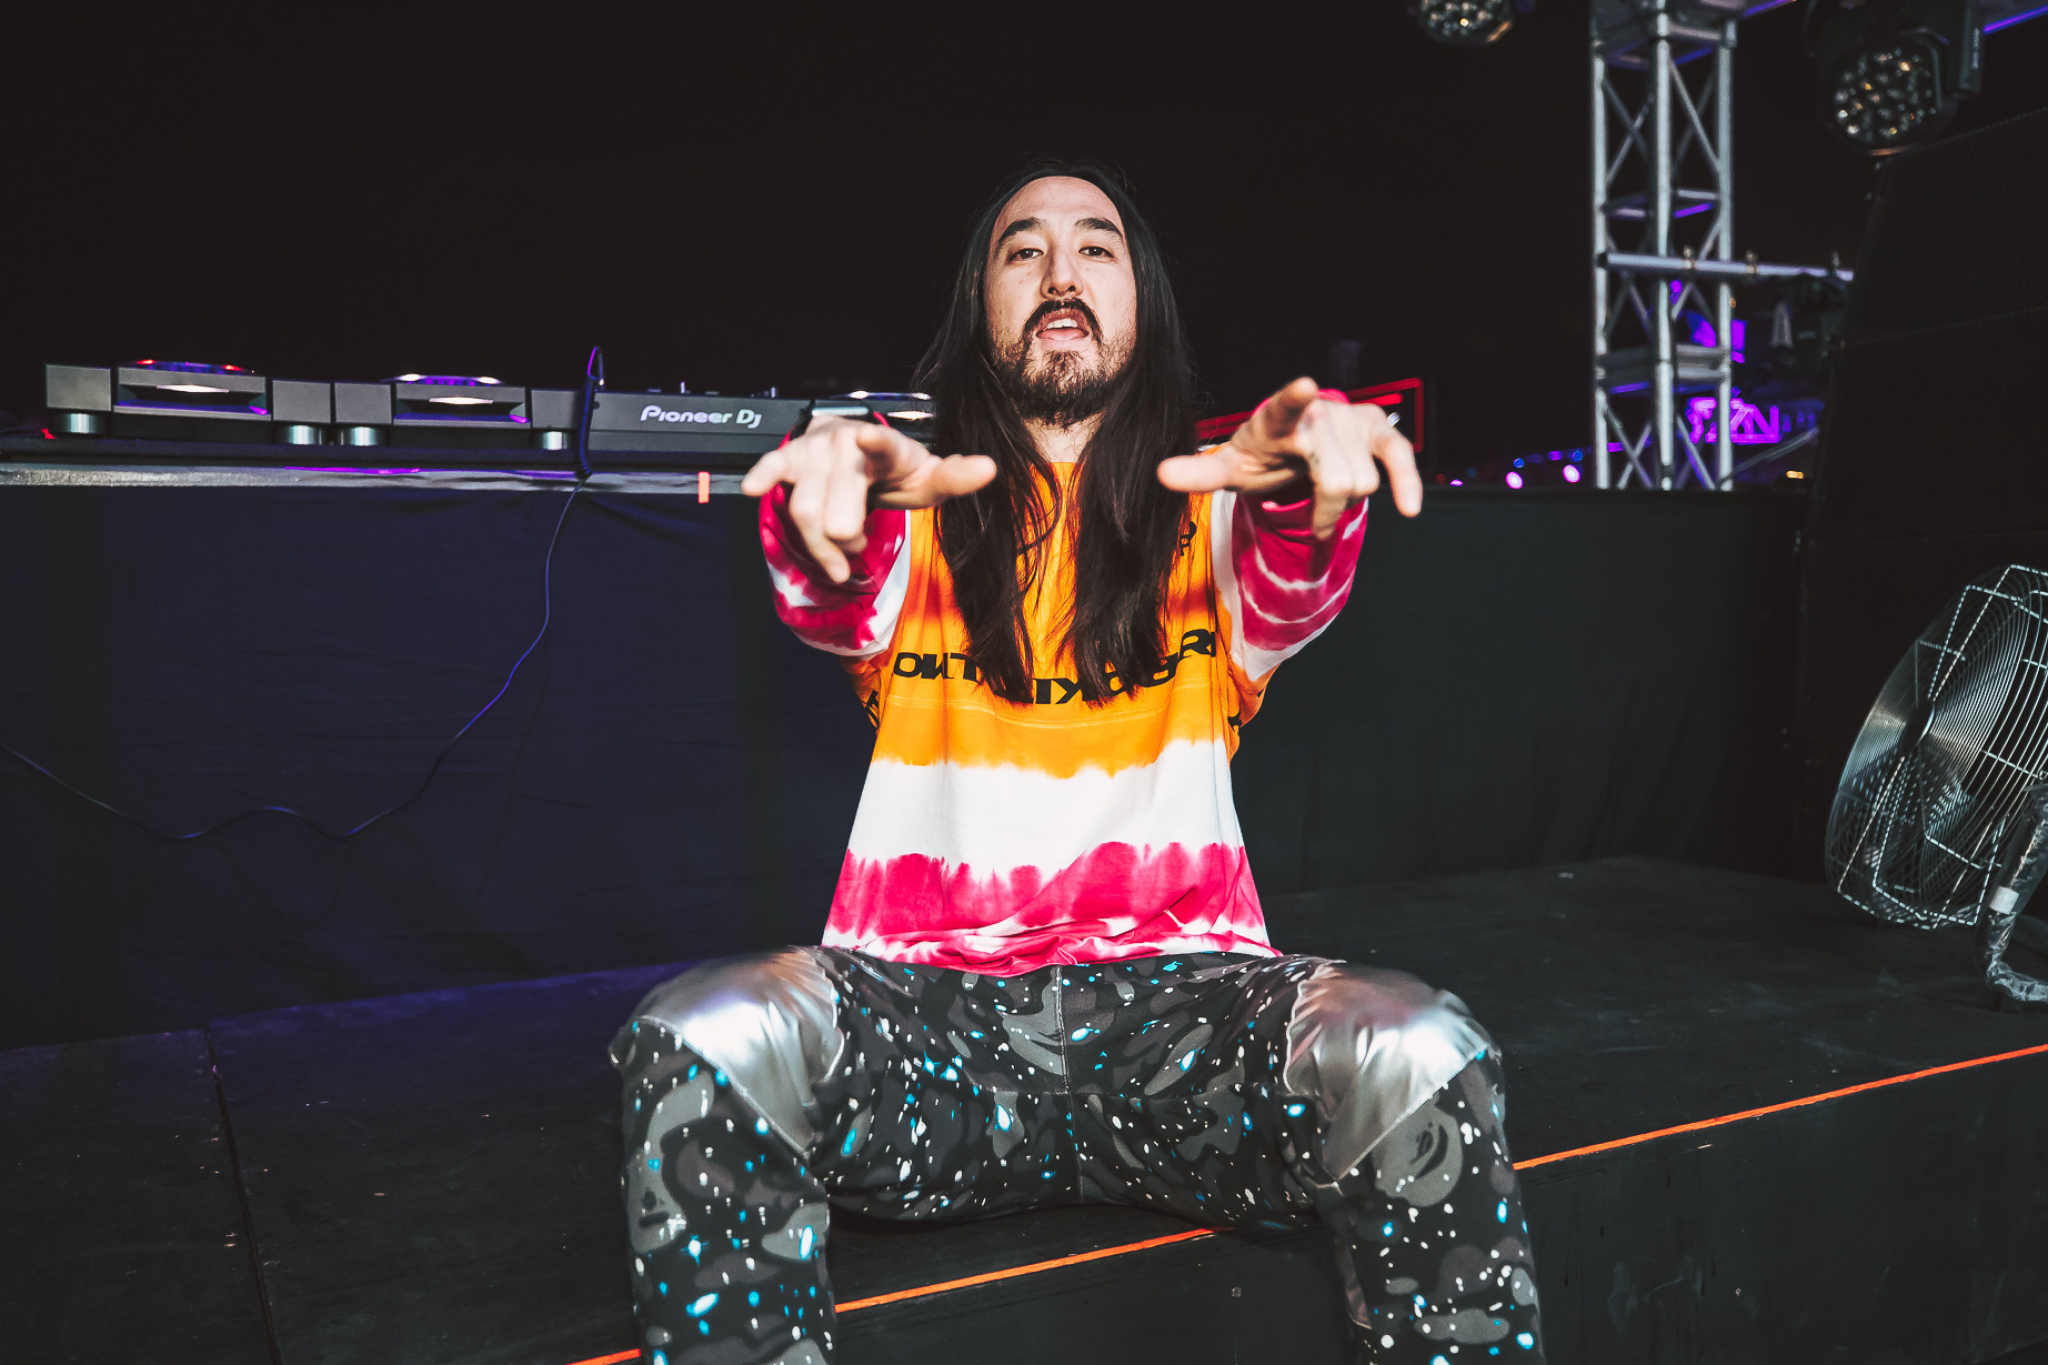 Women in EDM, Steve Aoki viewpoint, Music industry discussion, Your EDM, 2050x1370 HD Desktop